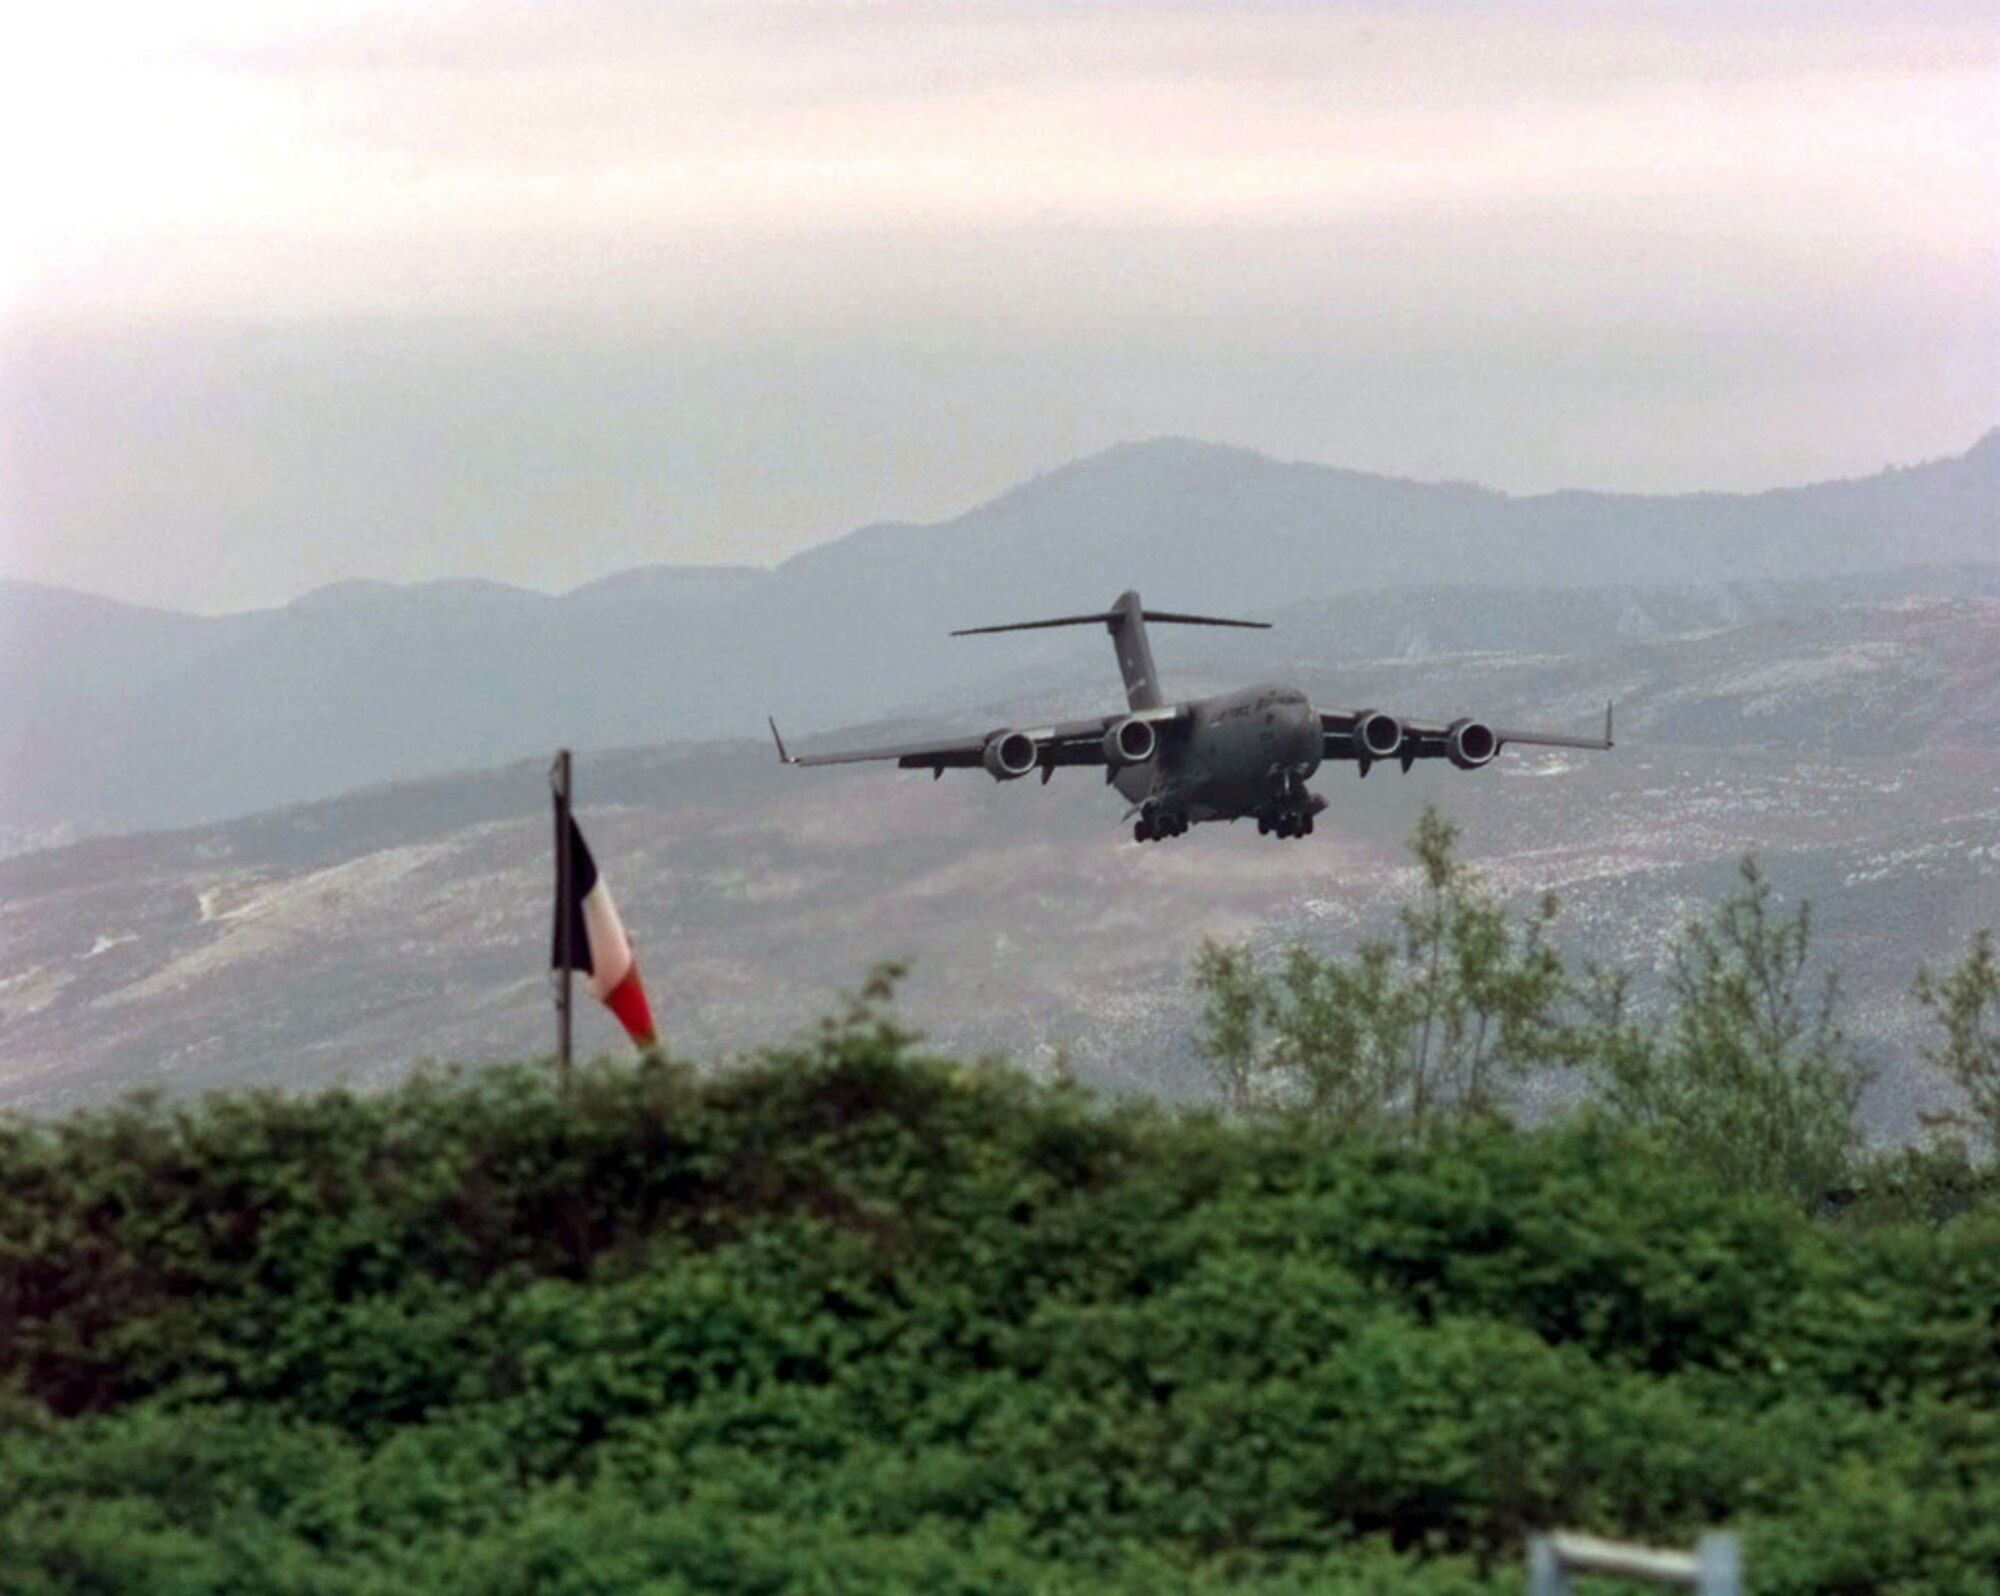 A U.S. Air Force C-17 Globemaster III from Joint Base Charleston makes its final approach to Rinas Airport in Albania during Operation Shining Hope, April 23, 1999. Medical Airmen provided humanitarian support for ethnic Albanian refugees fleeing Kosovo (U.S. Air Force illustration by Tech. Sgt. Cesar Rodriguez)